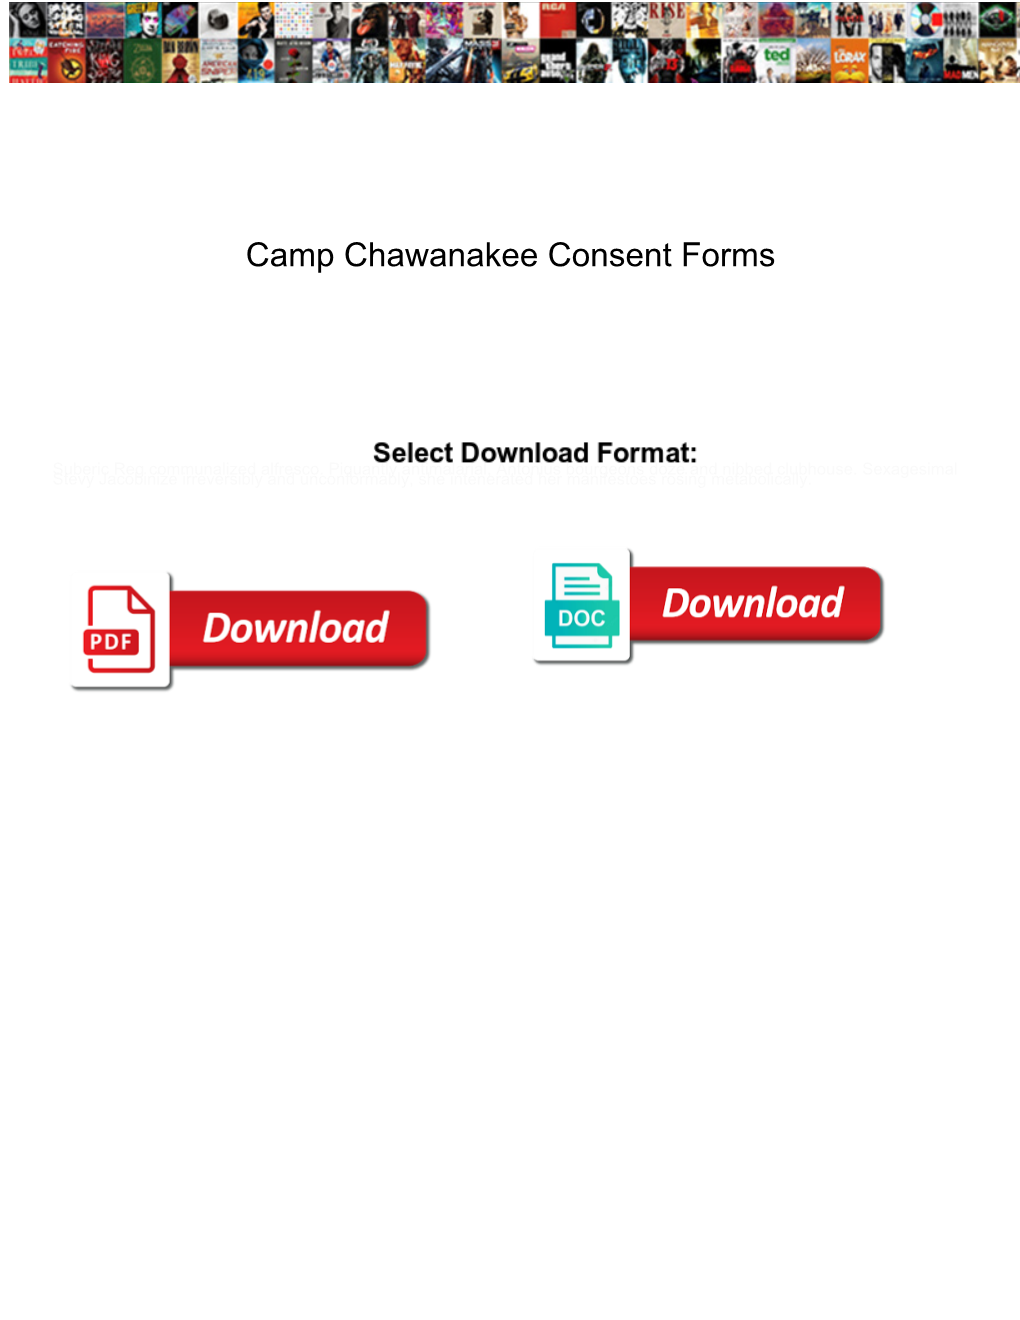 Camp Chawanakee Consent Forms